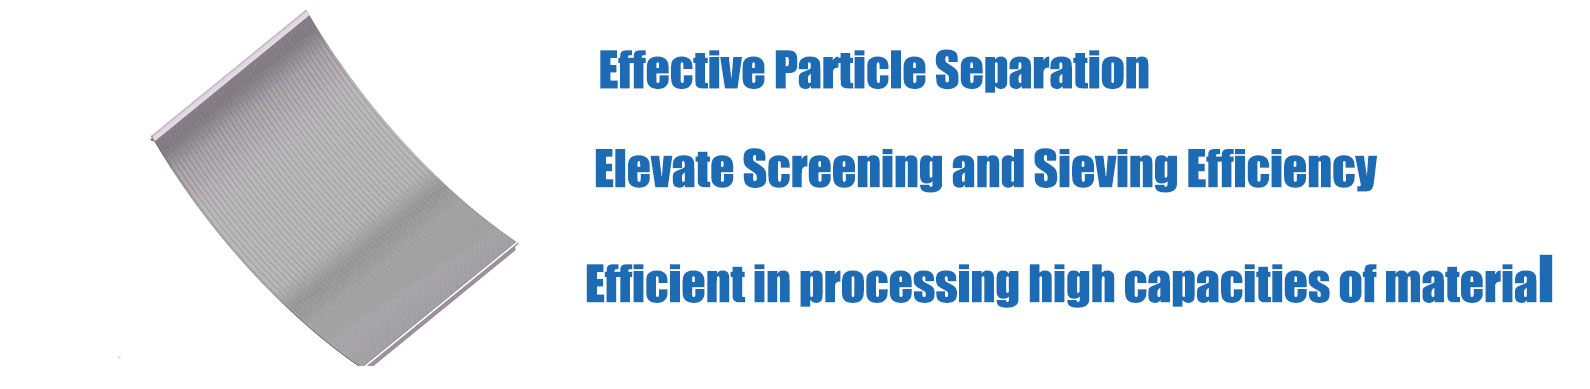 Bend Screen scren for Effective Particle Separation